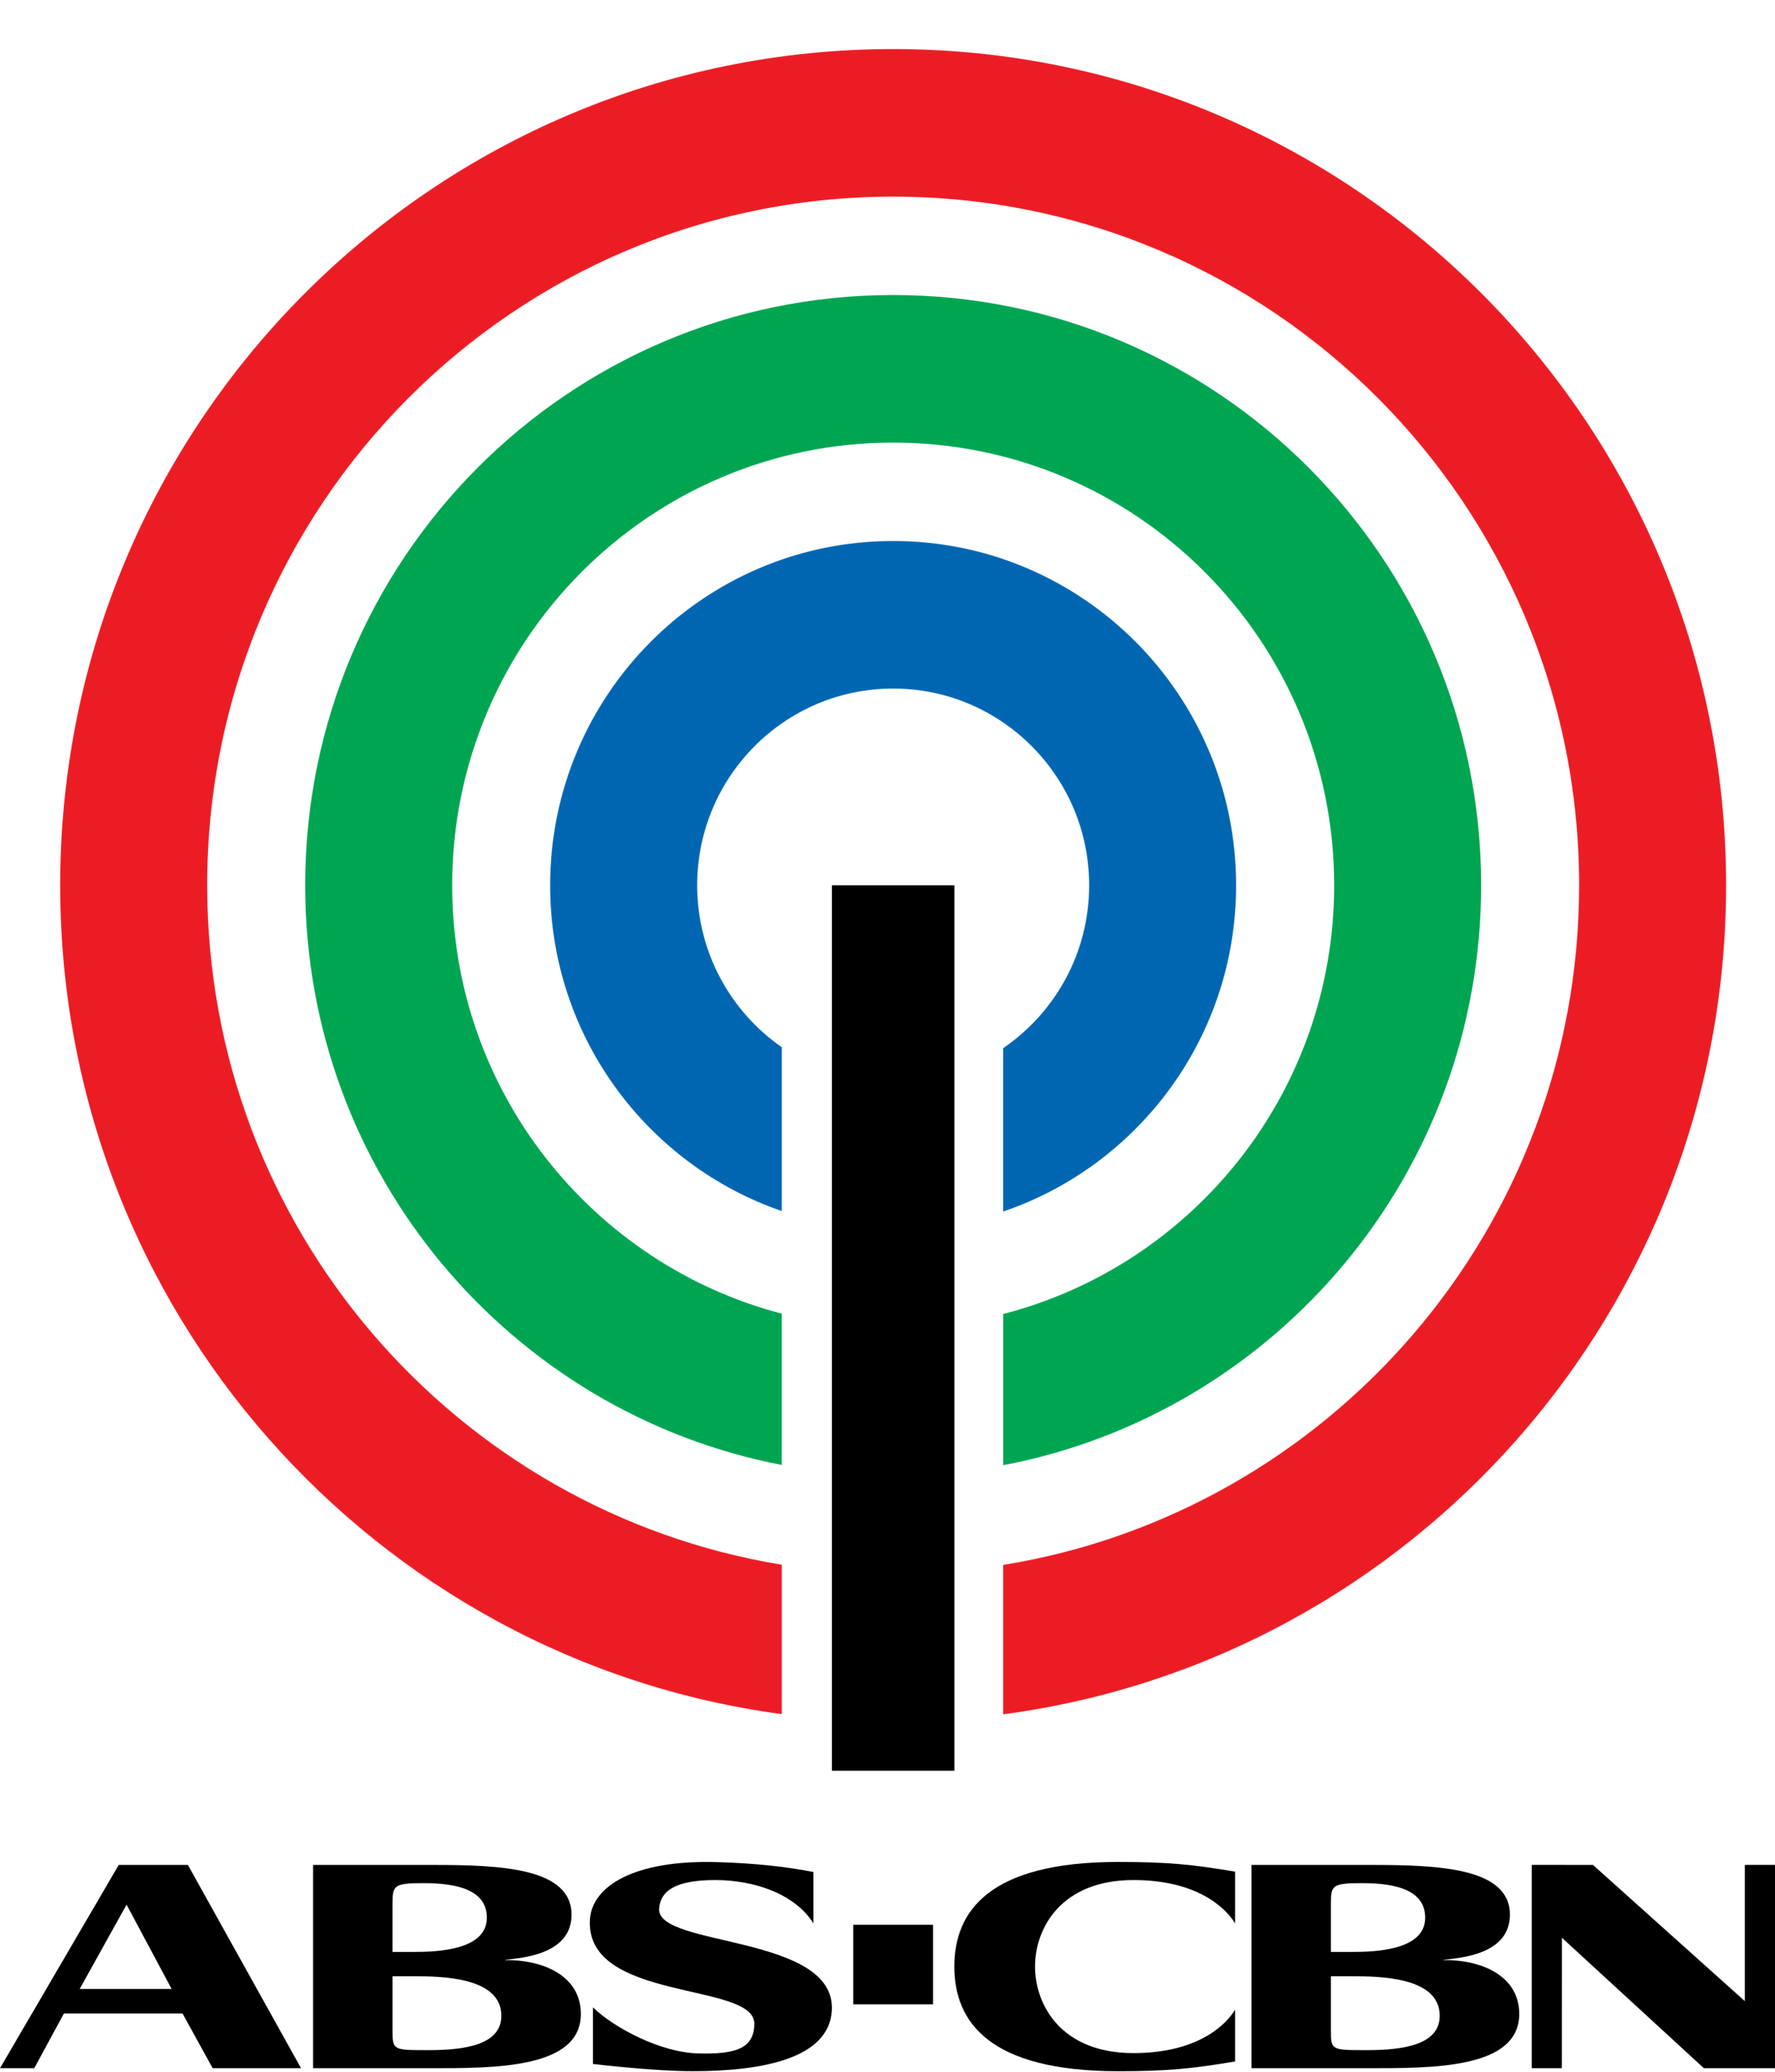 ABS-CBN_(2013).png